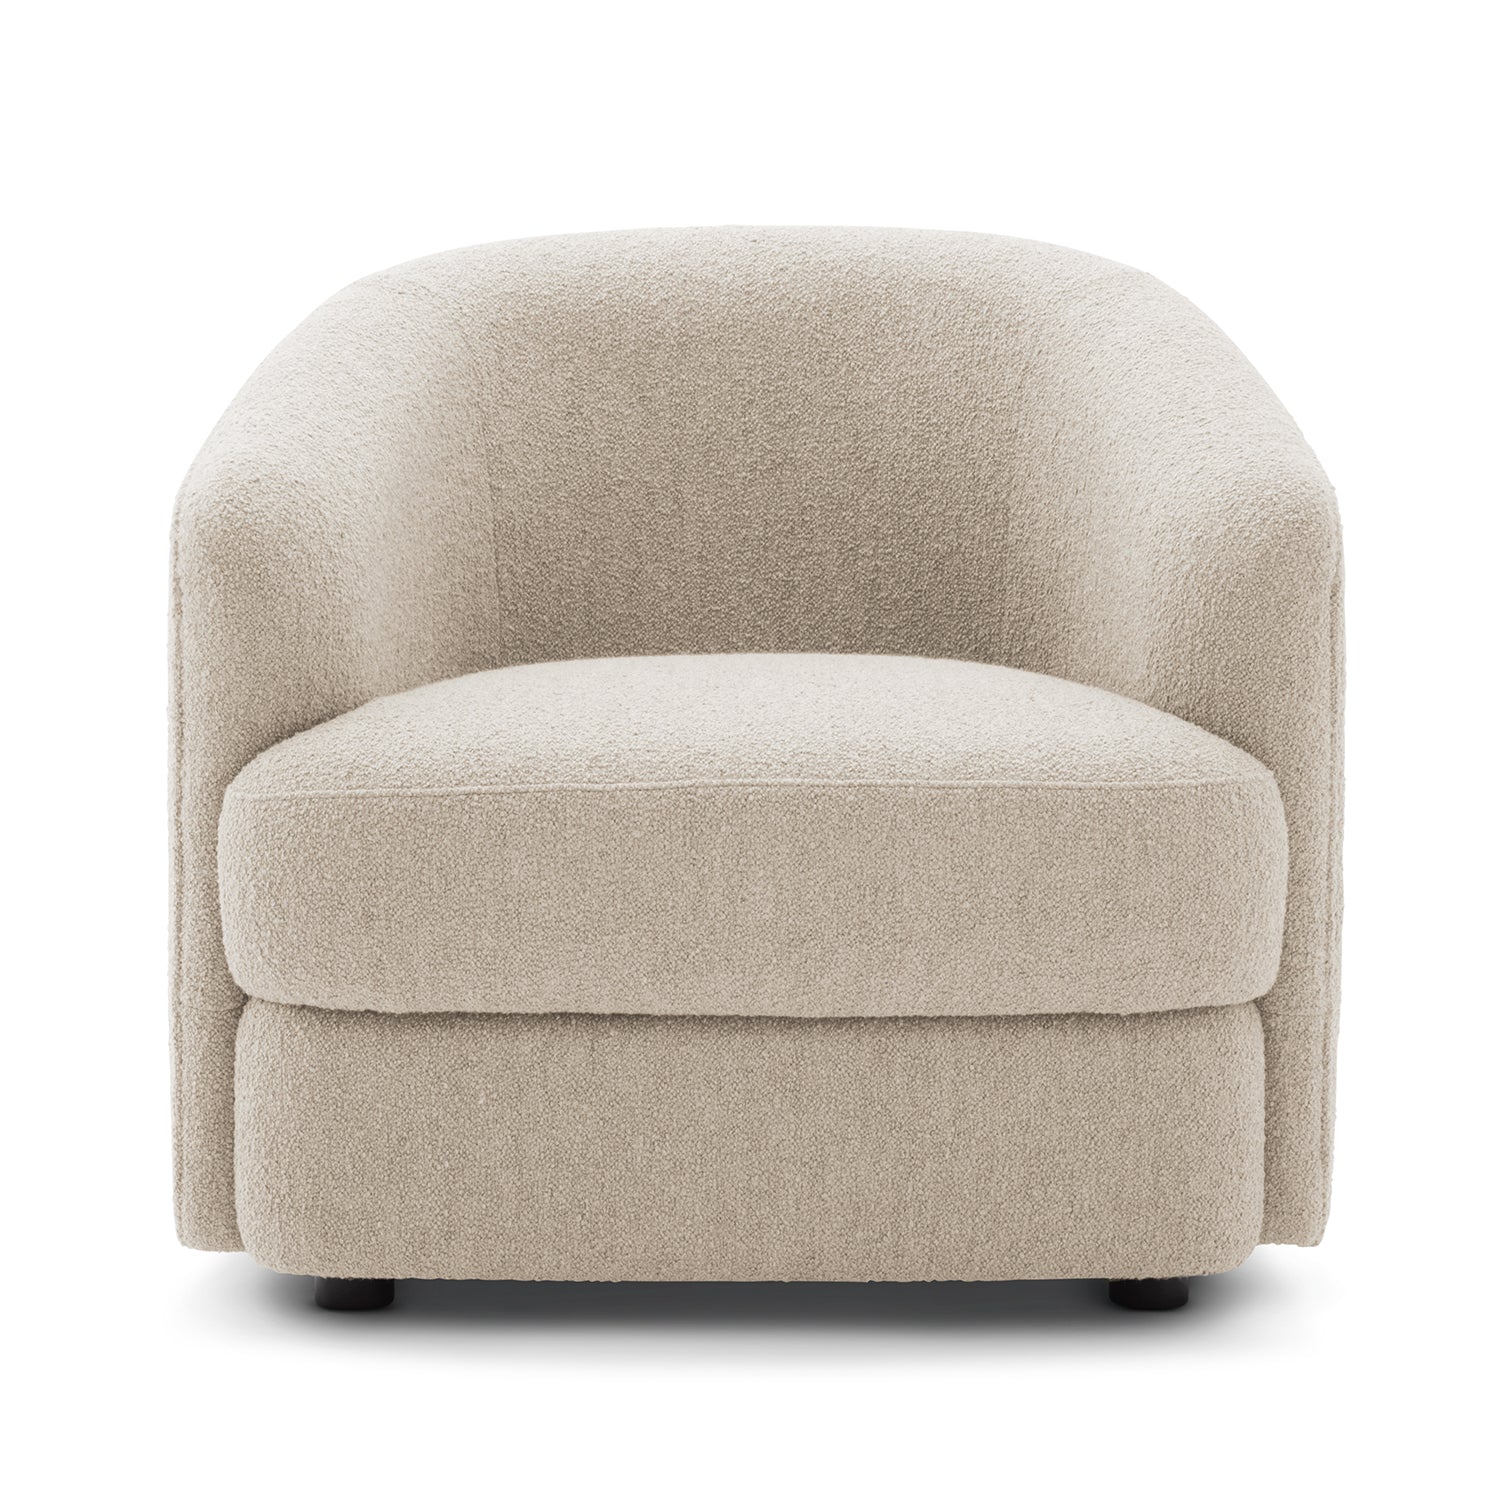 New Works Covent Lounge Chair in lana beige